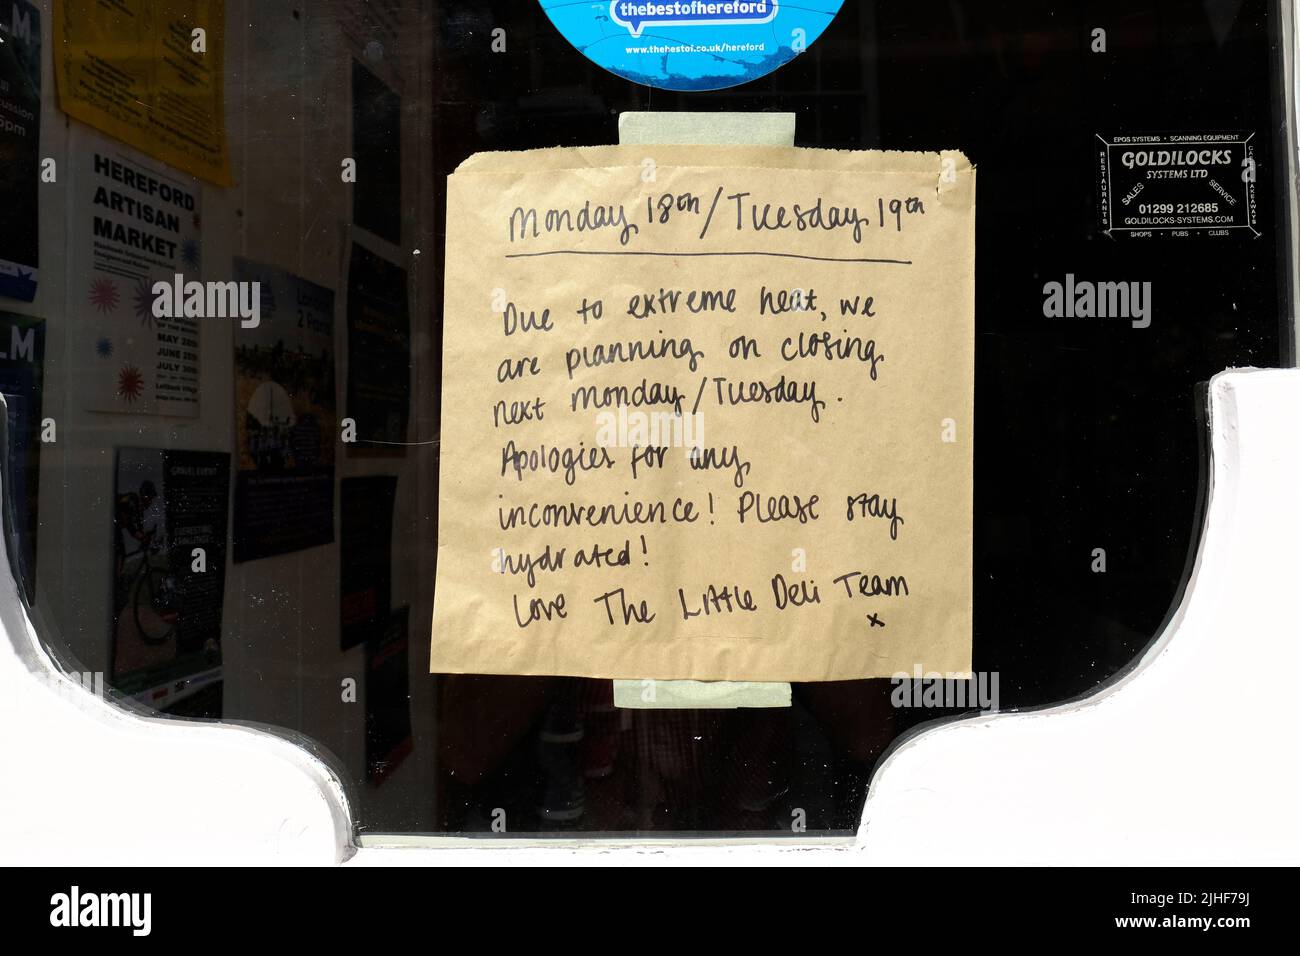 Hereford, Herefordshire, UK - Monday 18th July 2022 - A sign on a delicatessen shop says the business will be closed due to the extreme heat on Monday 18th and Tuesday 19th as UK temperatures approach 40c. Photo Steven May / Alamy Live News Stock Photo